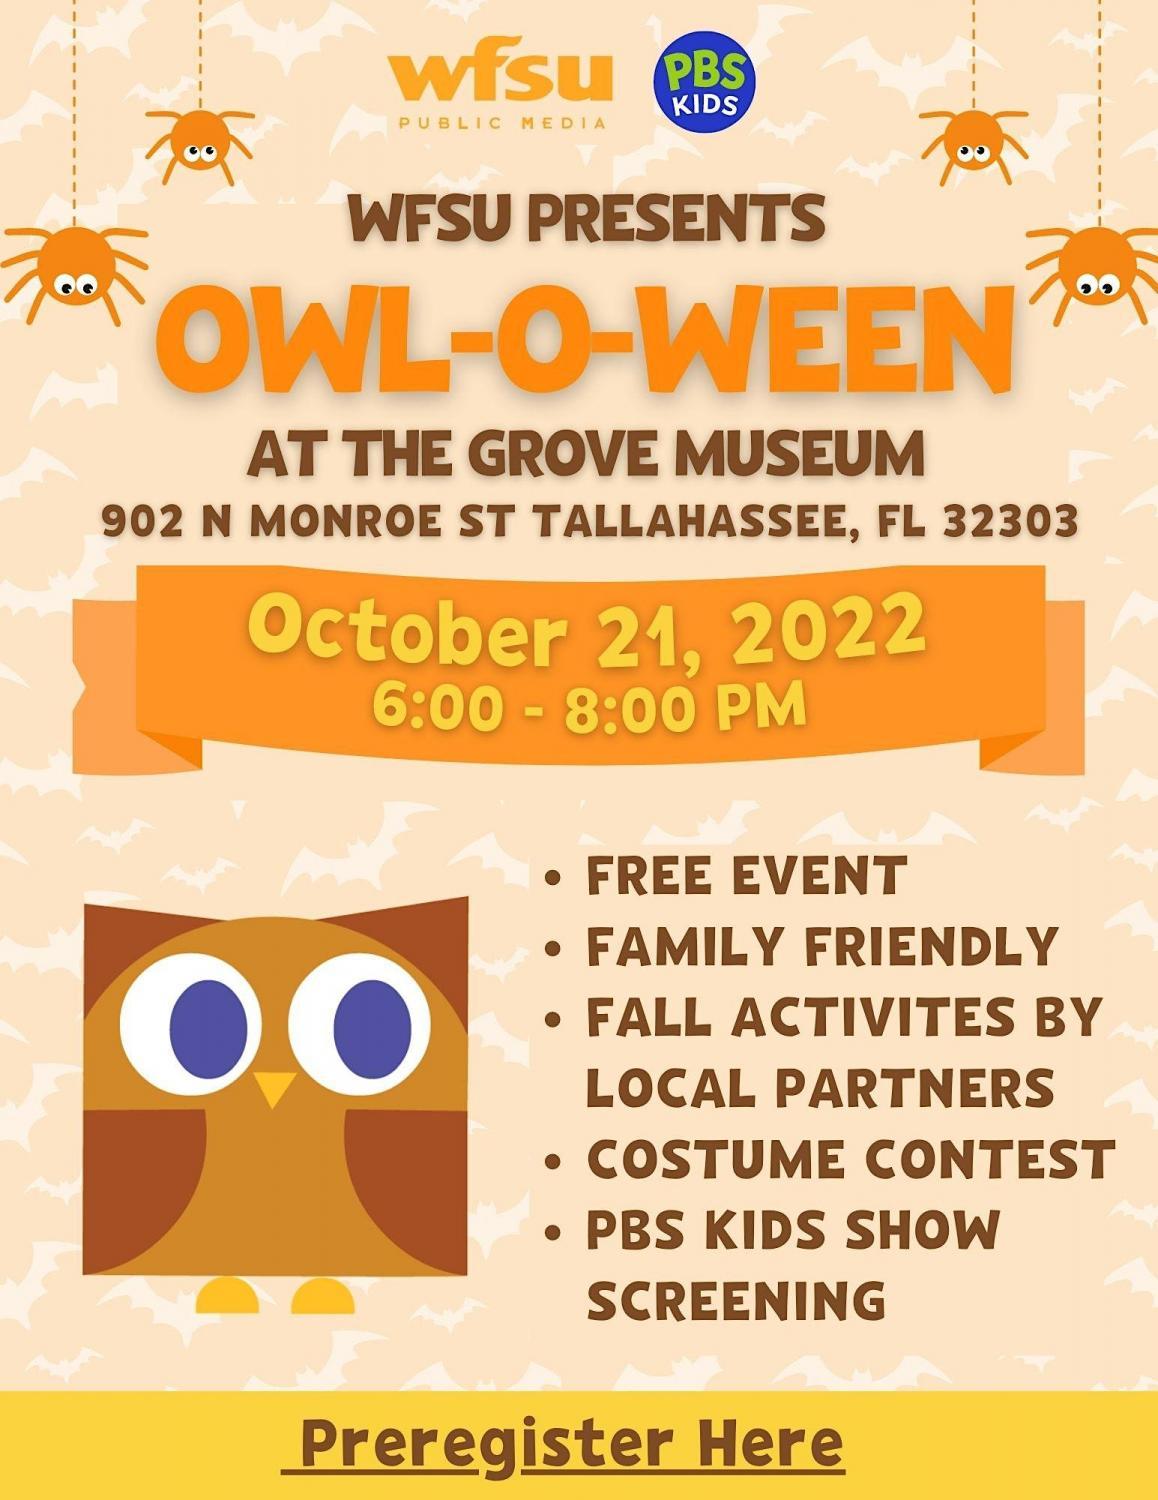 Owl-O-Ween in The Grove Museum!
Fri Oct 21, 7:00 PM - Fri Oct 21, 7:00 PM
in 2 days